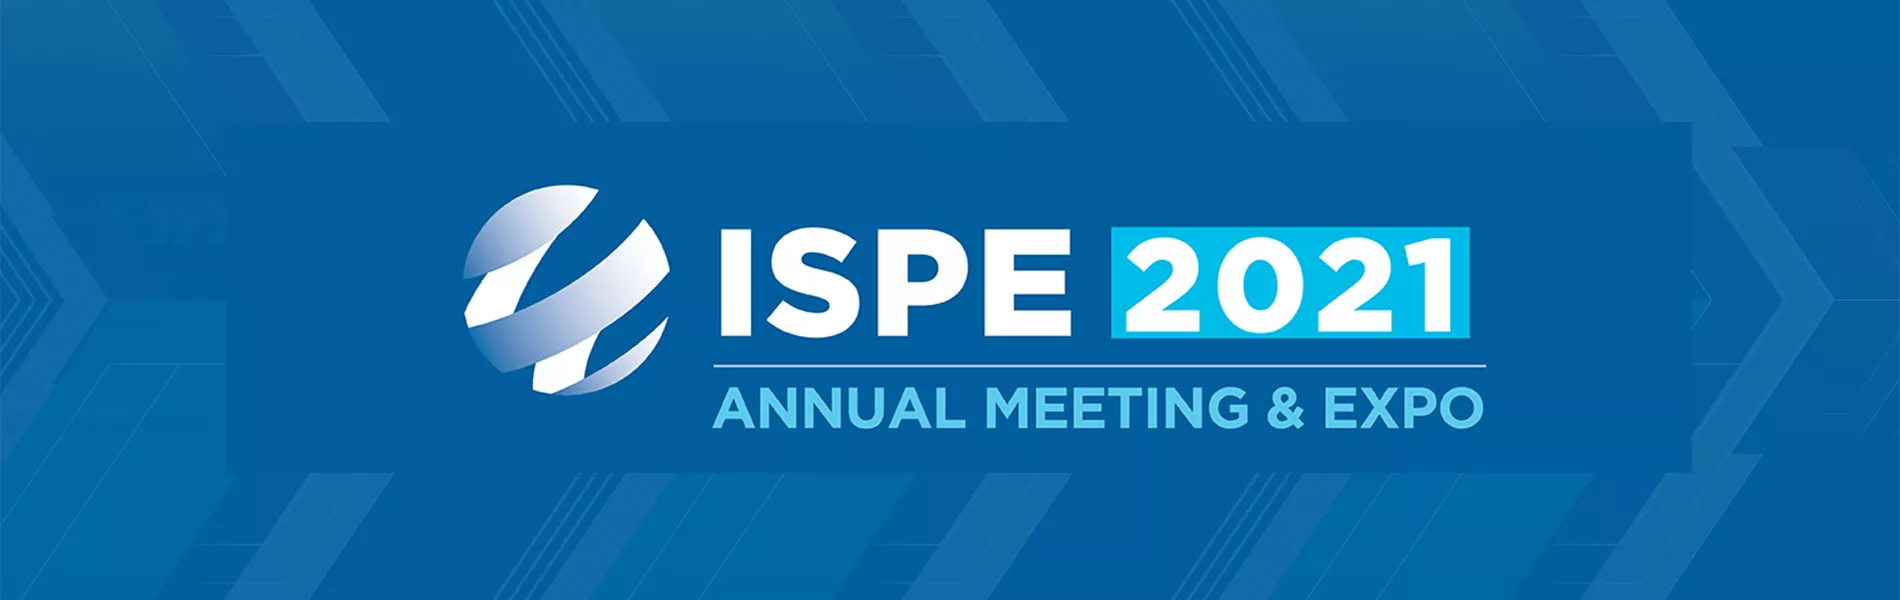 2021 ISPE Annual Meeting & Expo Banner